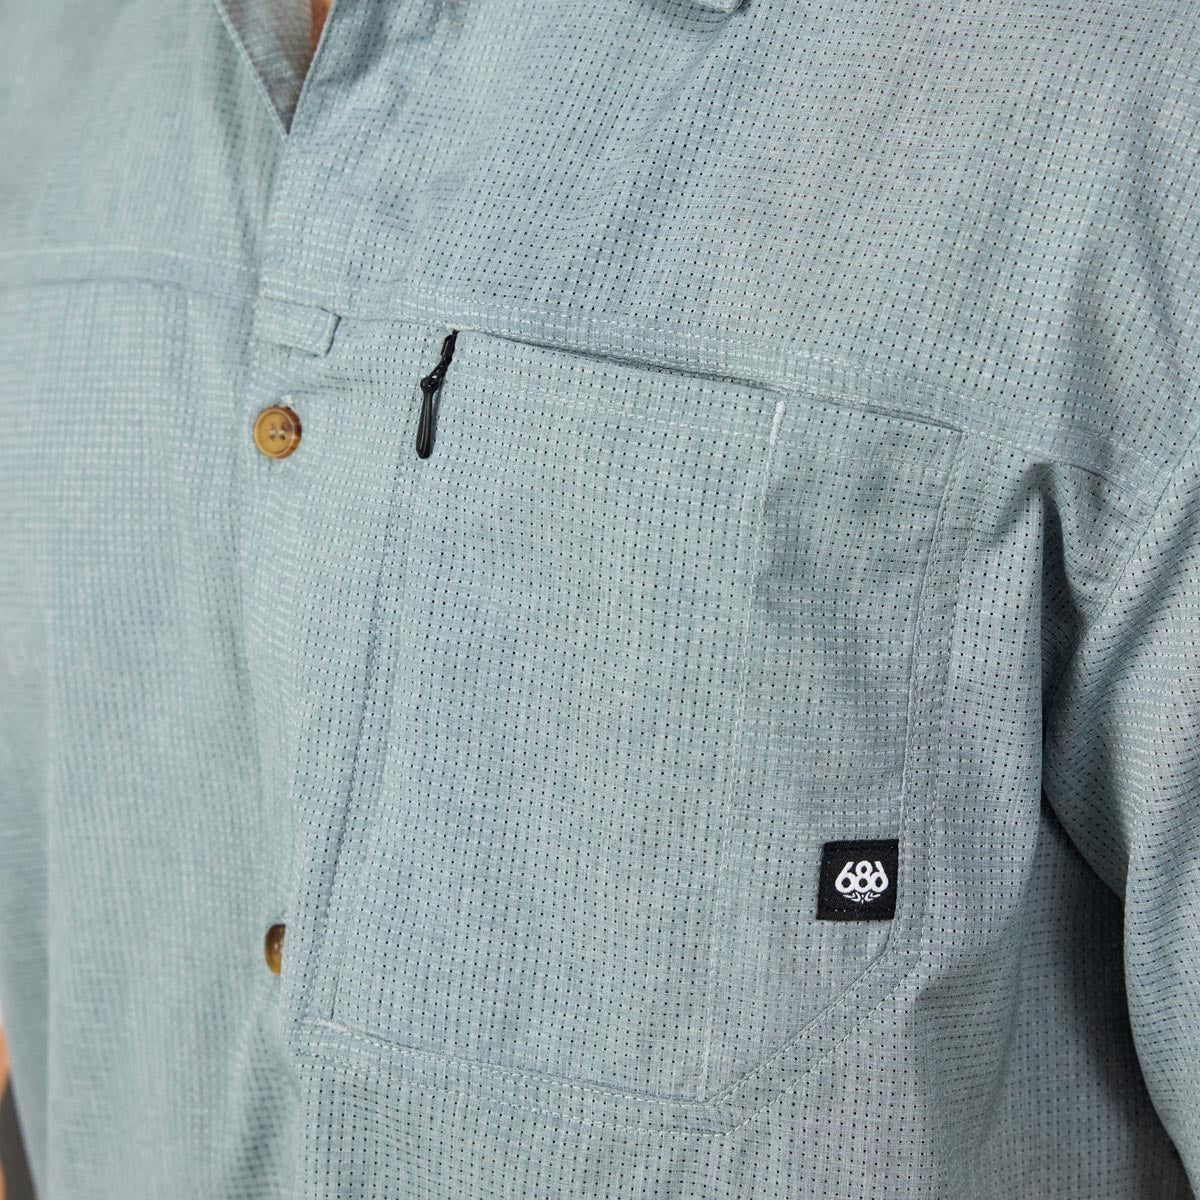 686 Canopy Woven Shirt - Heather Lead image 4